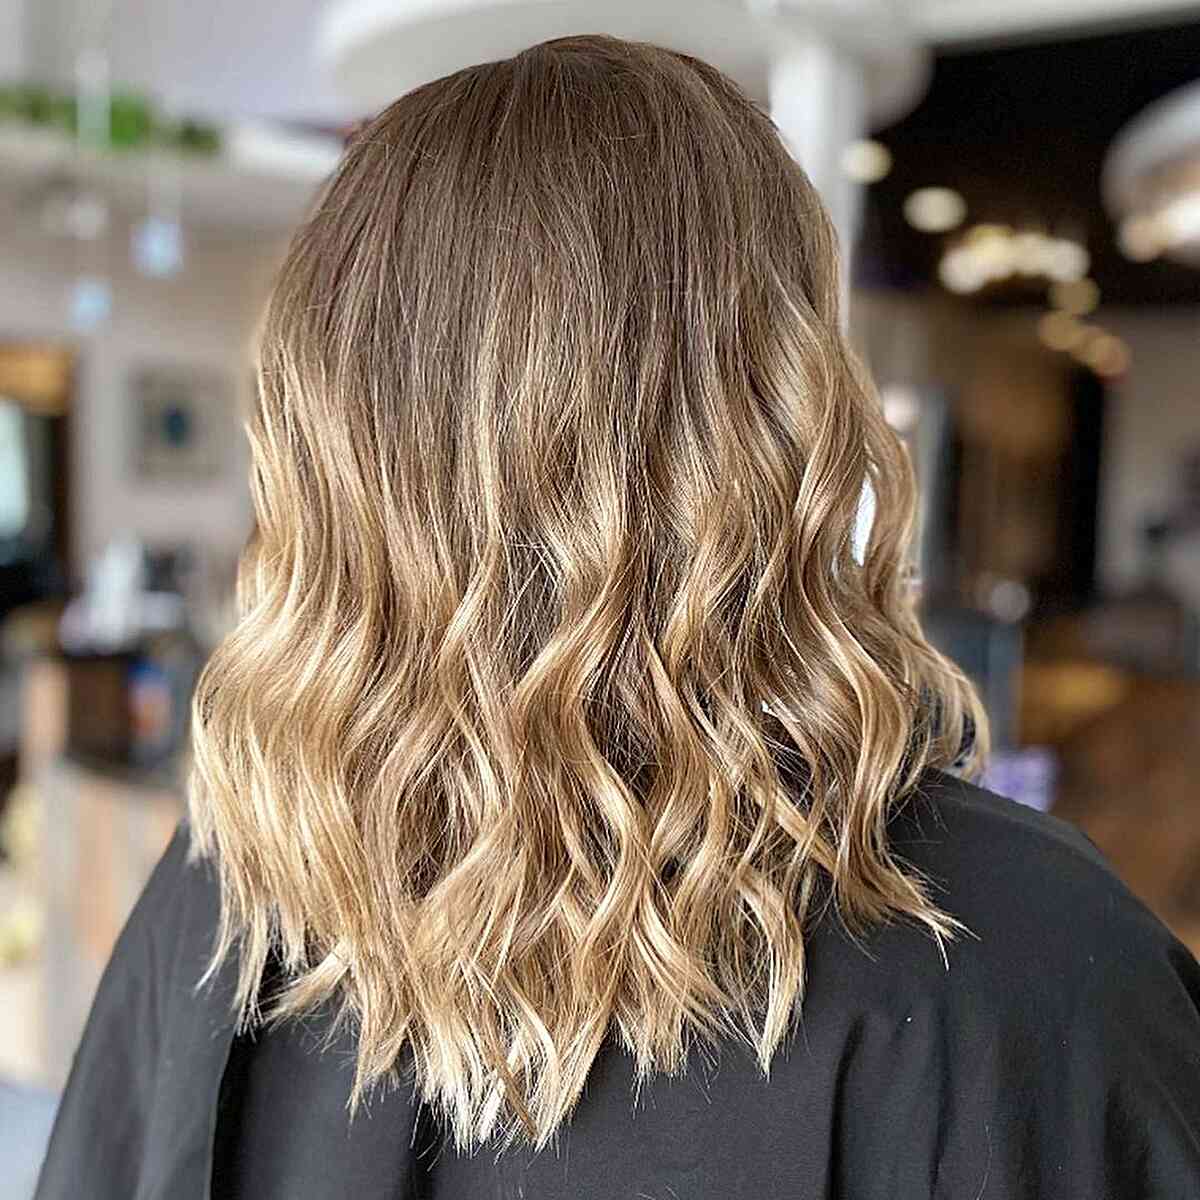 Low-Maintenance Dirty Blonde Balayage Ombre with Mid-Length Beach Waves